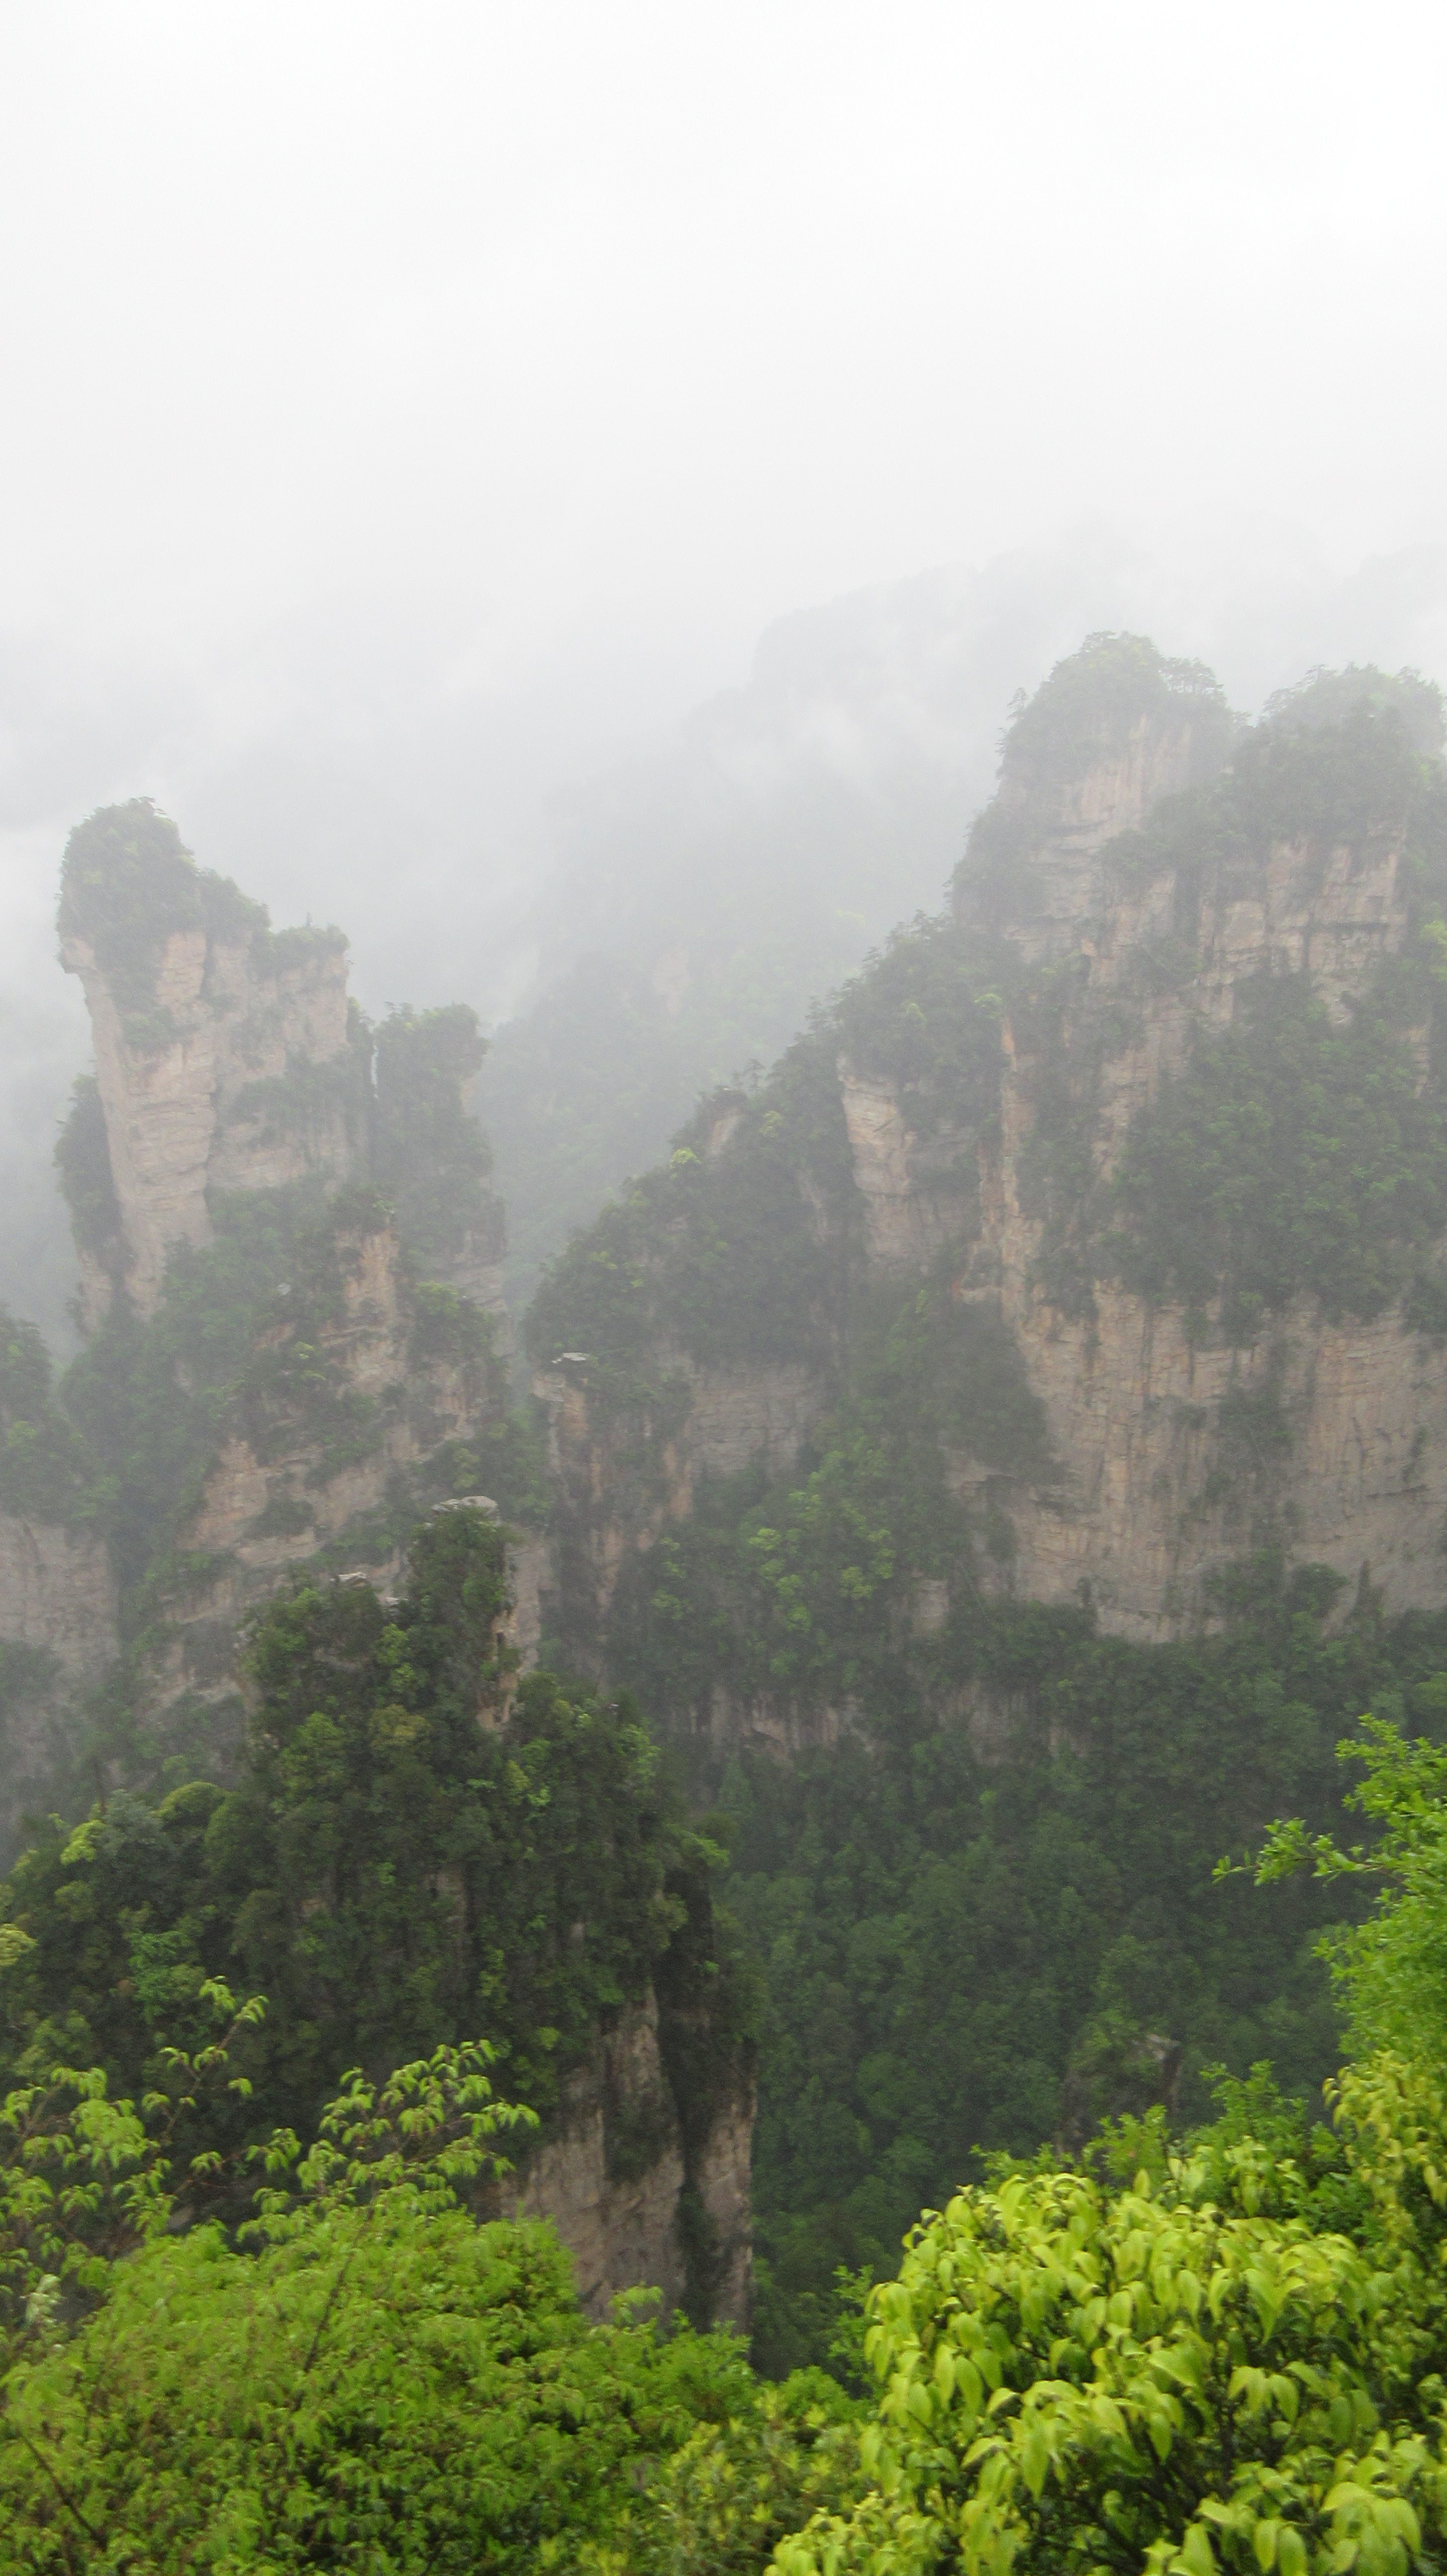 CHINESE PAINTING. The rock formations look like a Chinese painting when the mist wraps them during and after rain. 